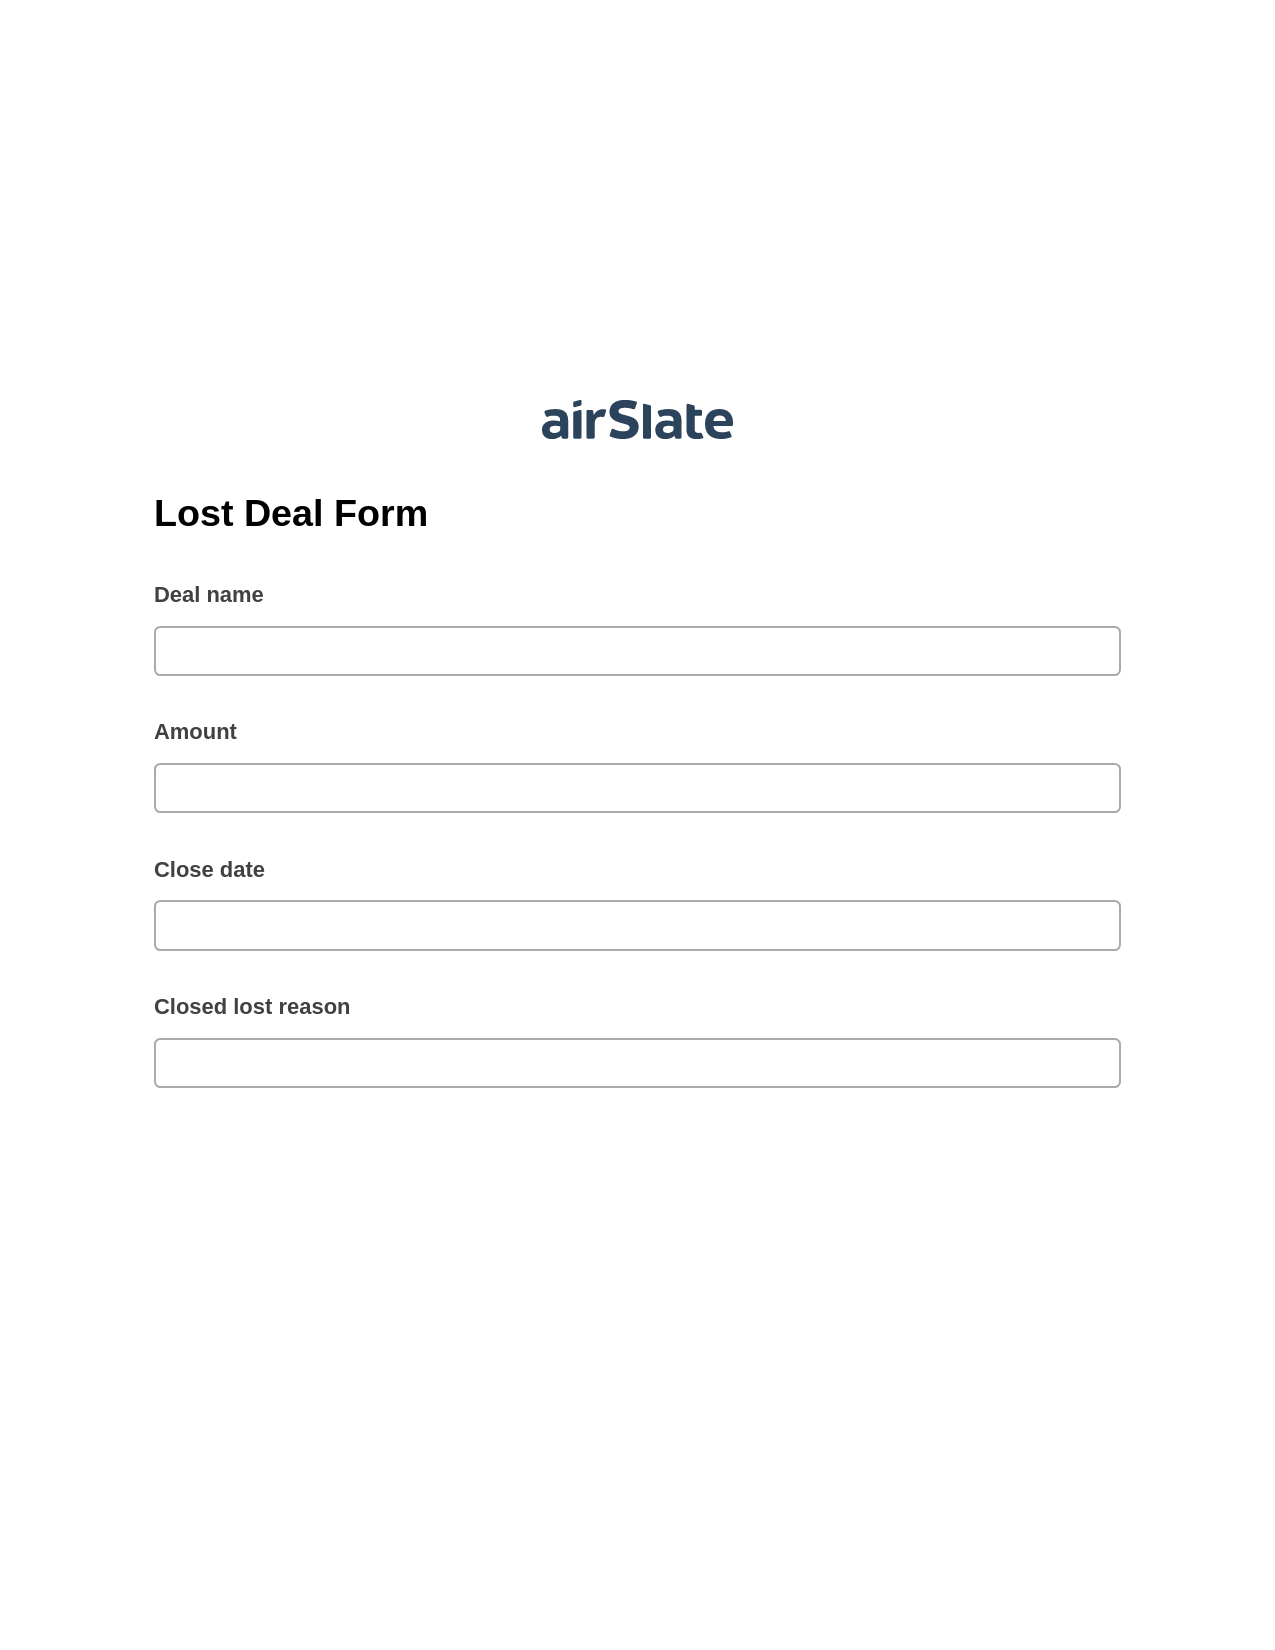 Lost Deal Form Pre-fill from CSV File Bot, Webhook Bot, Archive to SharePoint Folder Bot